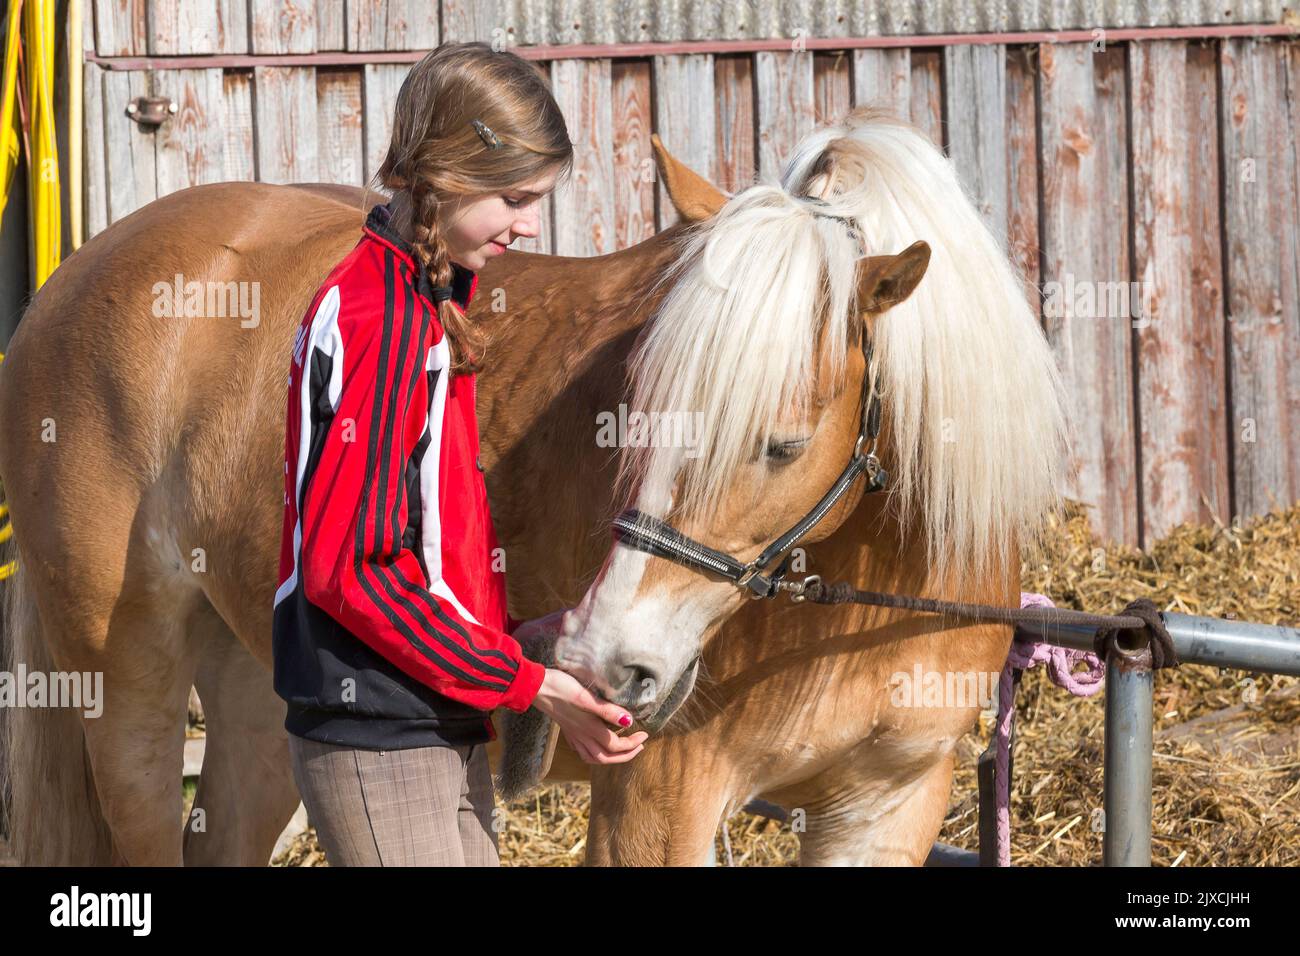 Haflinger Horse. A girl feeds a horse with treats, Germany Stock Photo